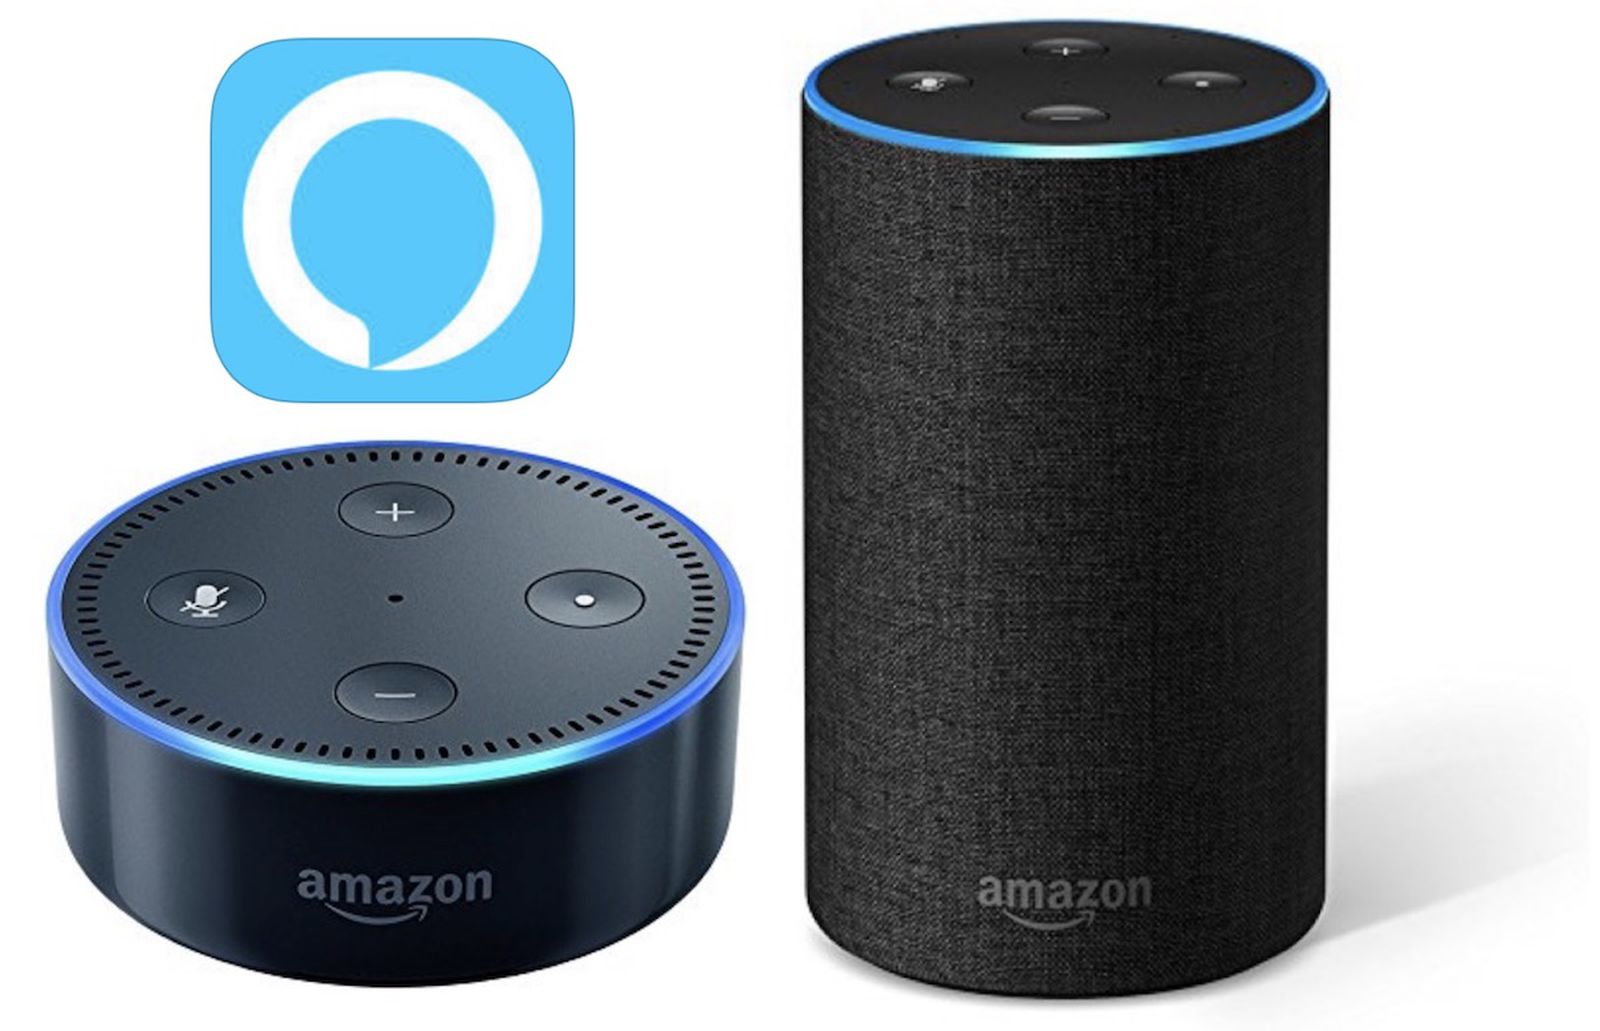 alexa time out app